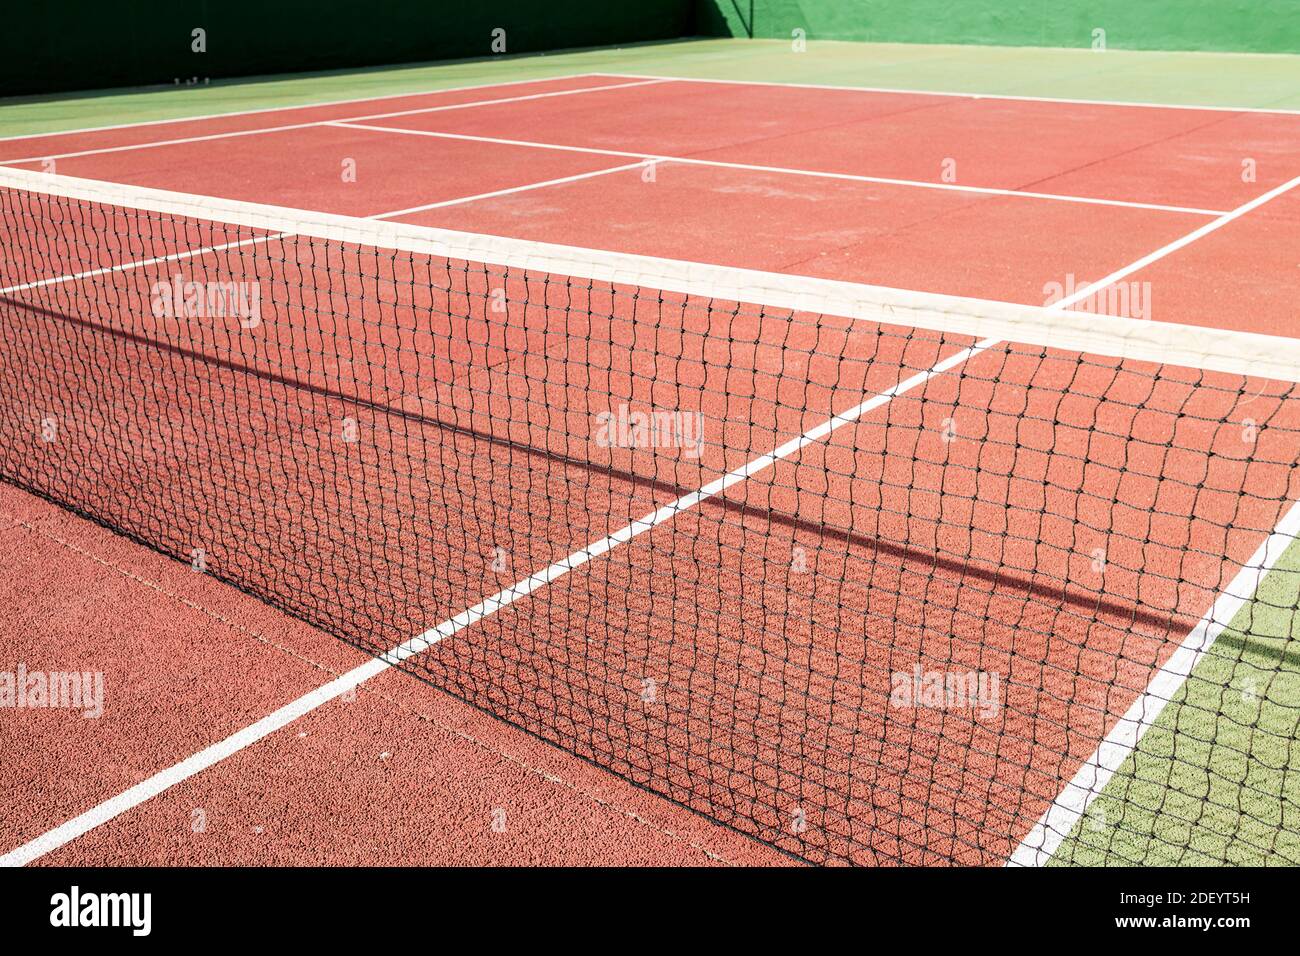 Abstract detail of a hard court, tennis courts in Costa Adeje, Tenerife, Canary Islands, Spain Stock Photo